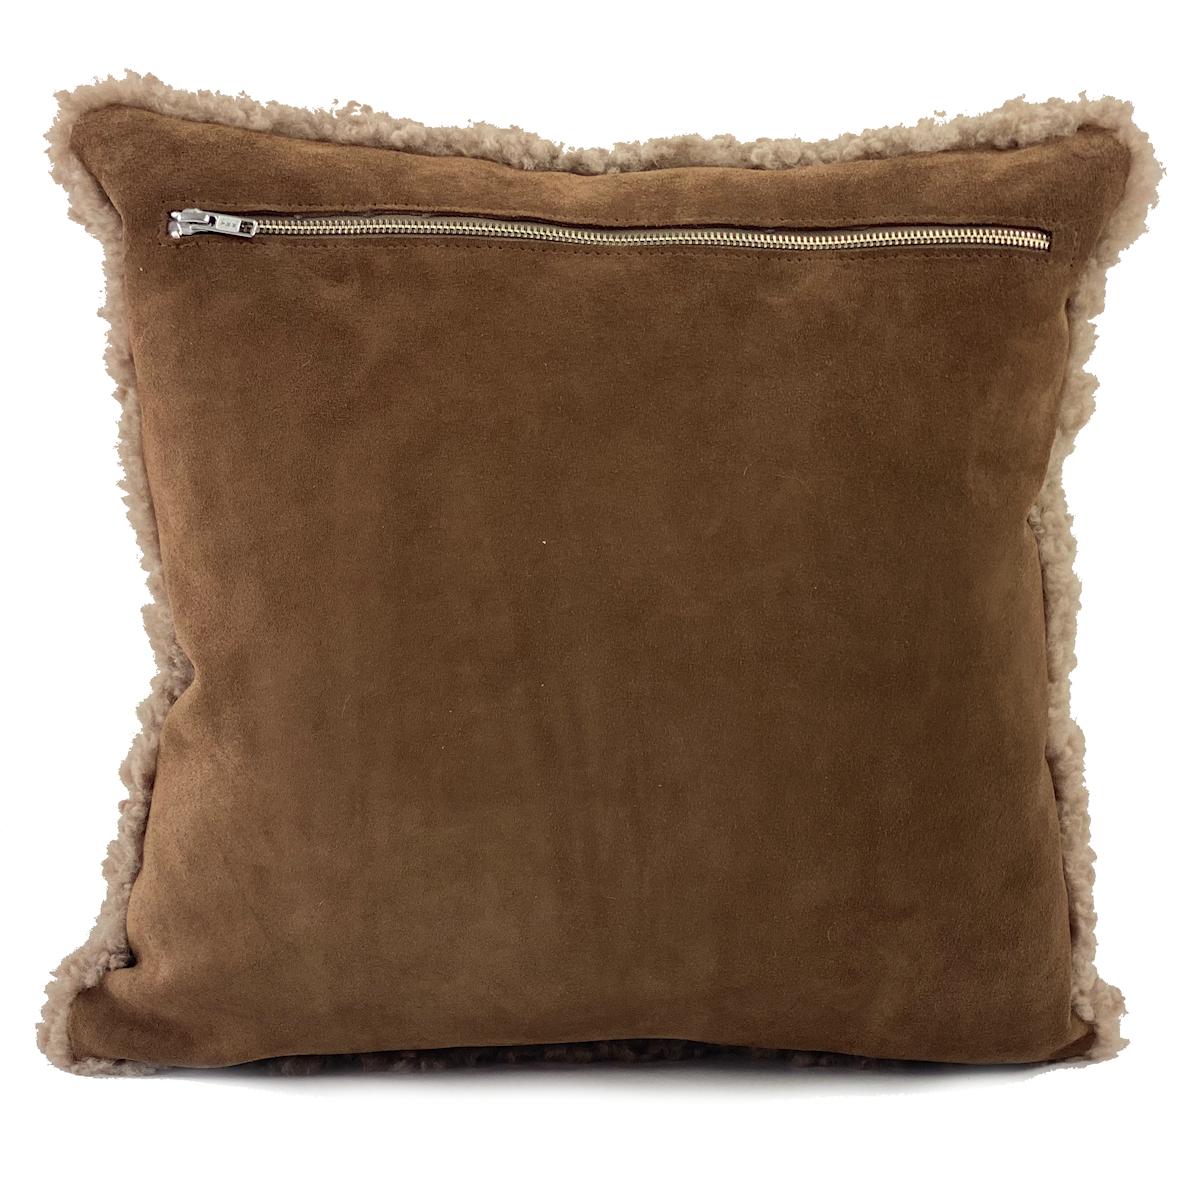 Elevate the cozy and natural textures in your decor with this hazelnut brown shearling pillow. The sheepskin wool features a short and curly wool pile that will add beautiful and alluring textures to a room. Part of the boucle collection, this